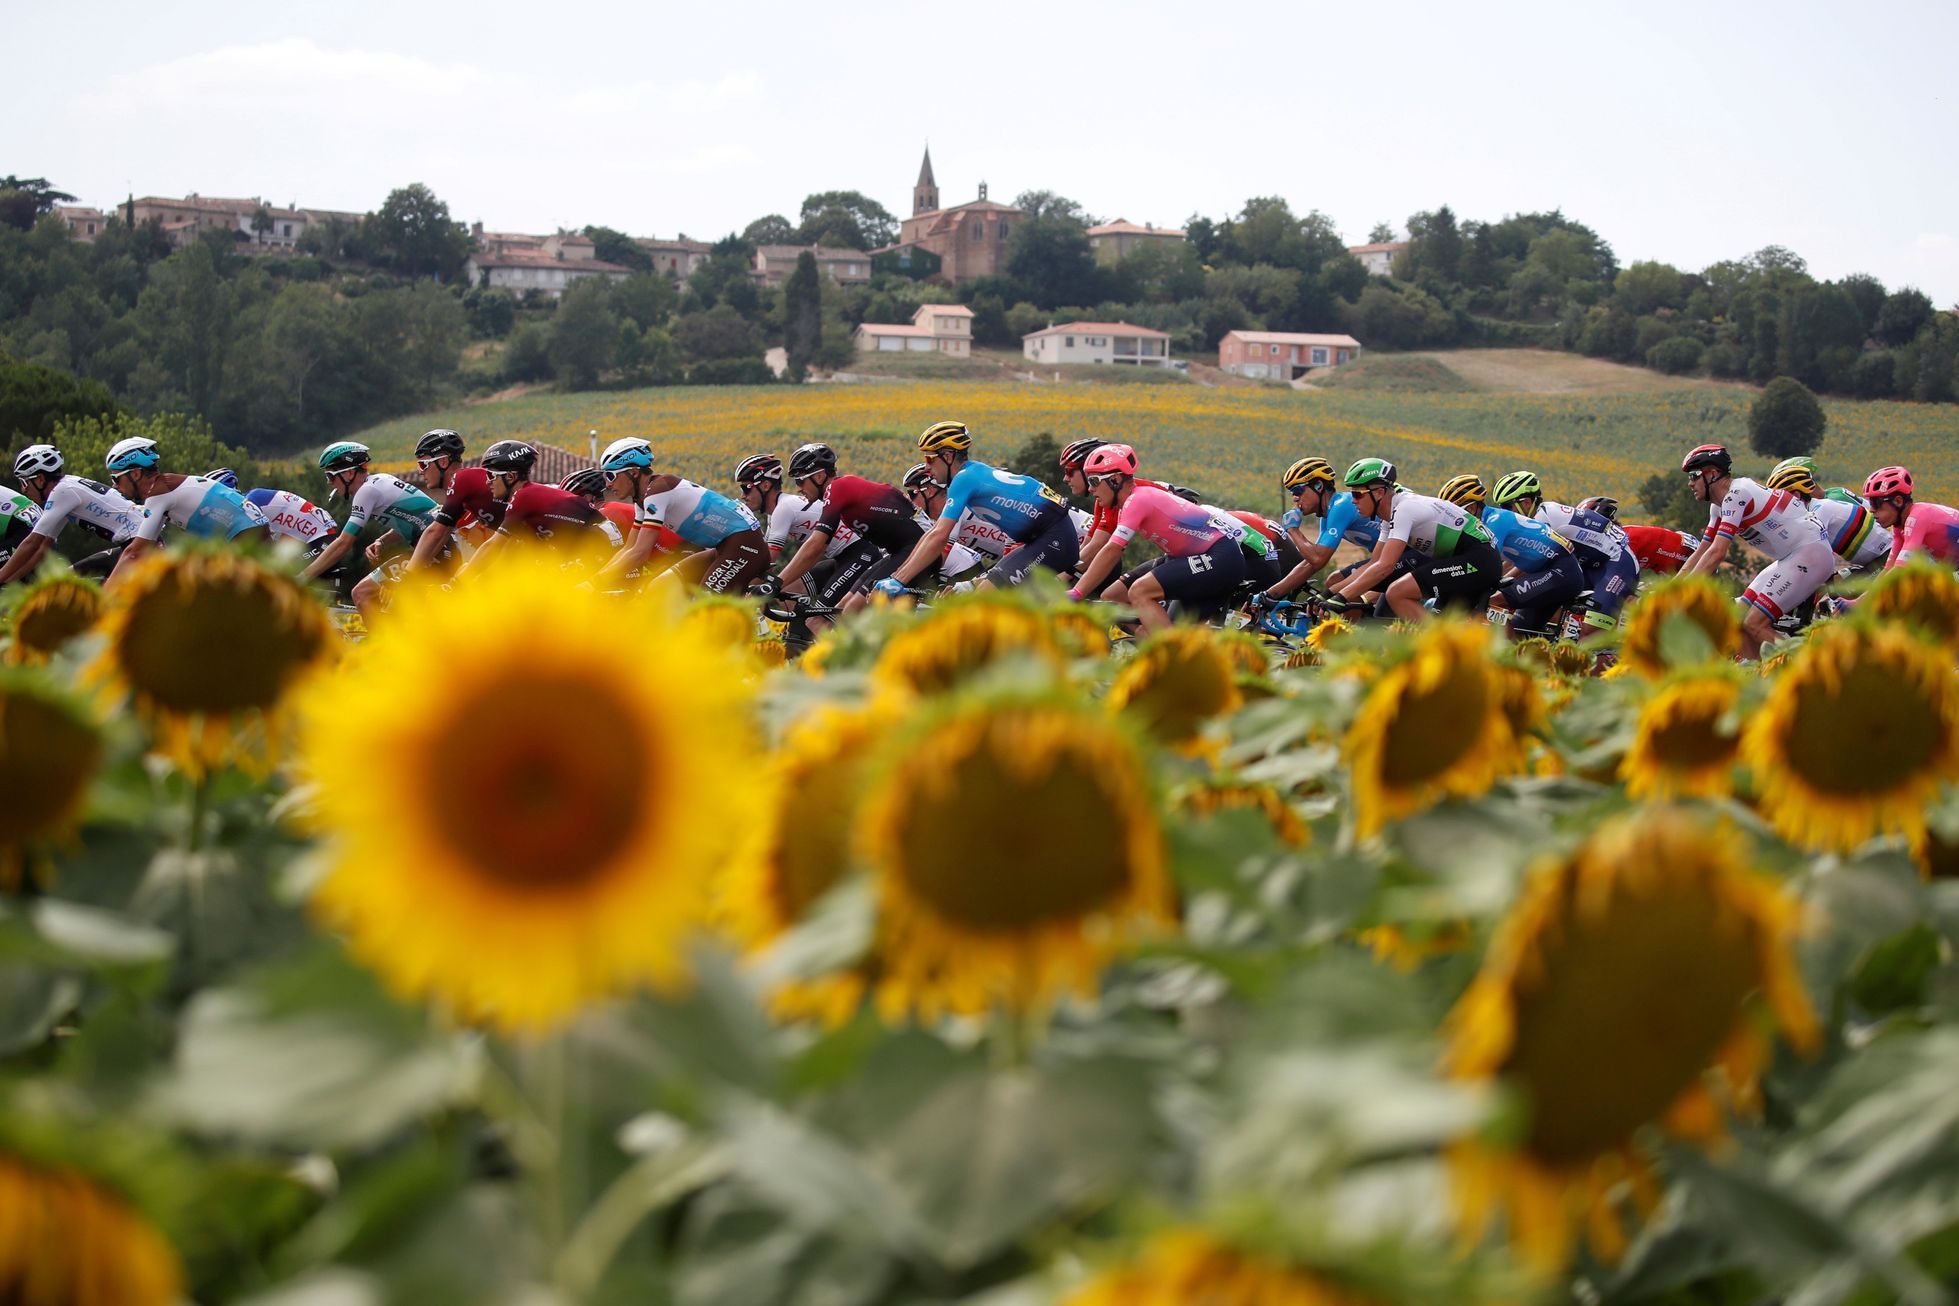 Tour de France - The 167-km Stage 11 from Albi to Toulouse